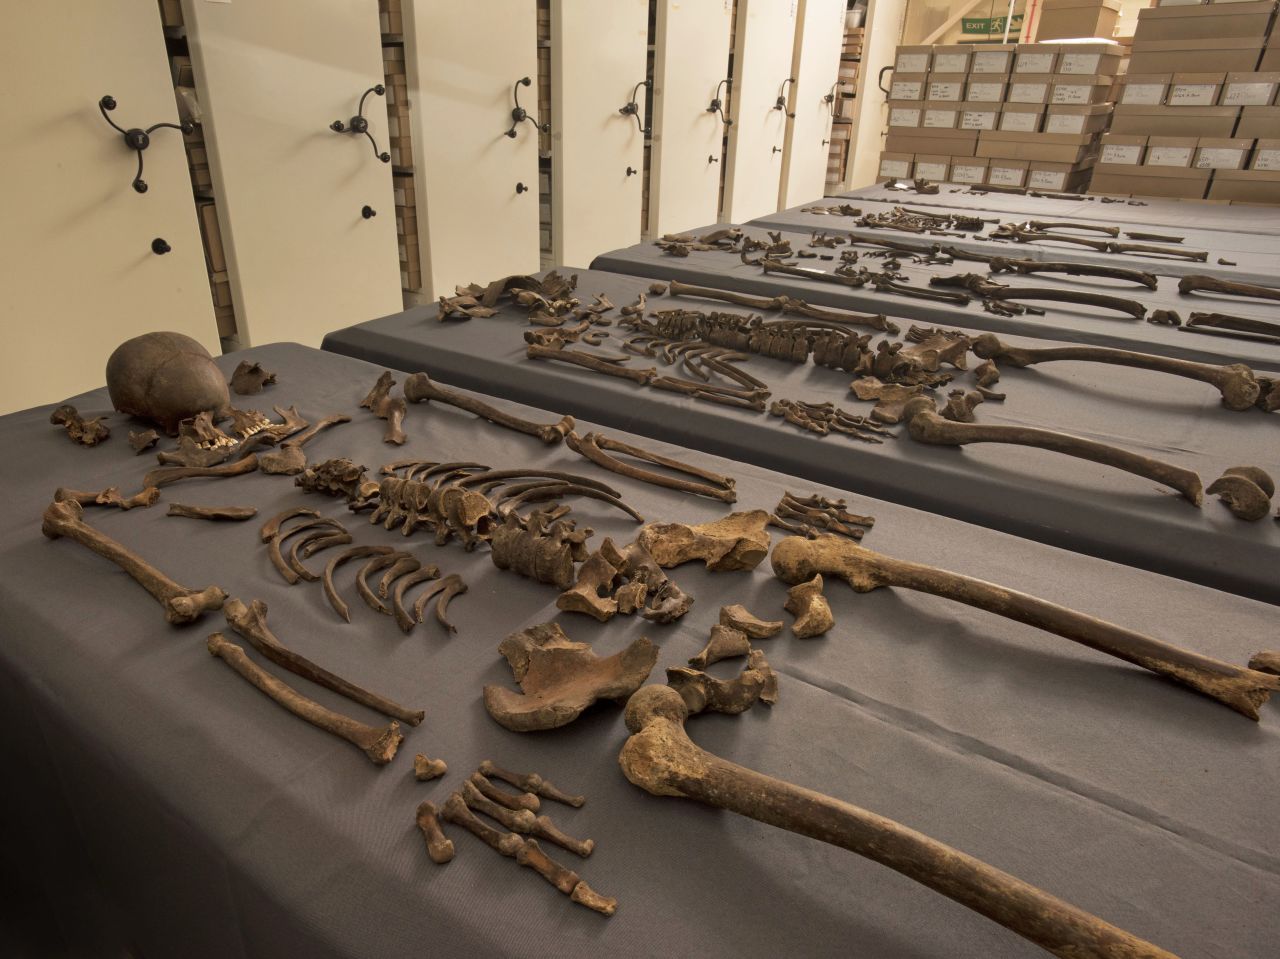 Scientists examined samples from 20 skeletons, looking for for traces of the plague pathogen Yersinia pestis, which they found in five of the individuals, confirming they had been exposed to it before they died.